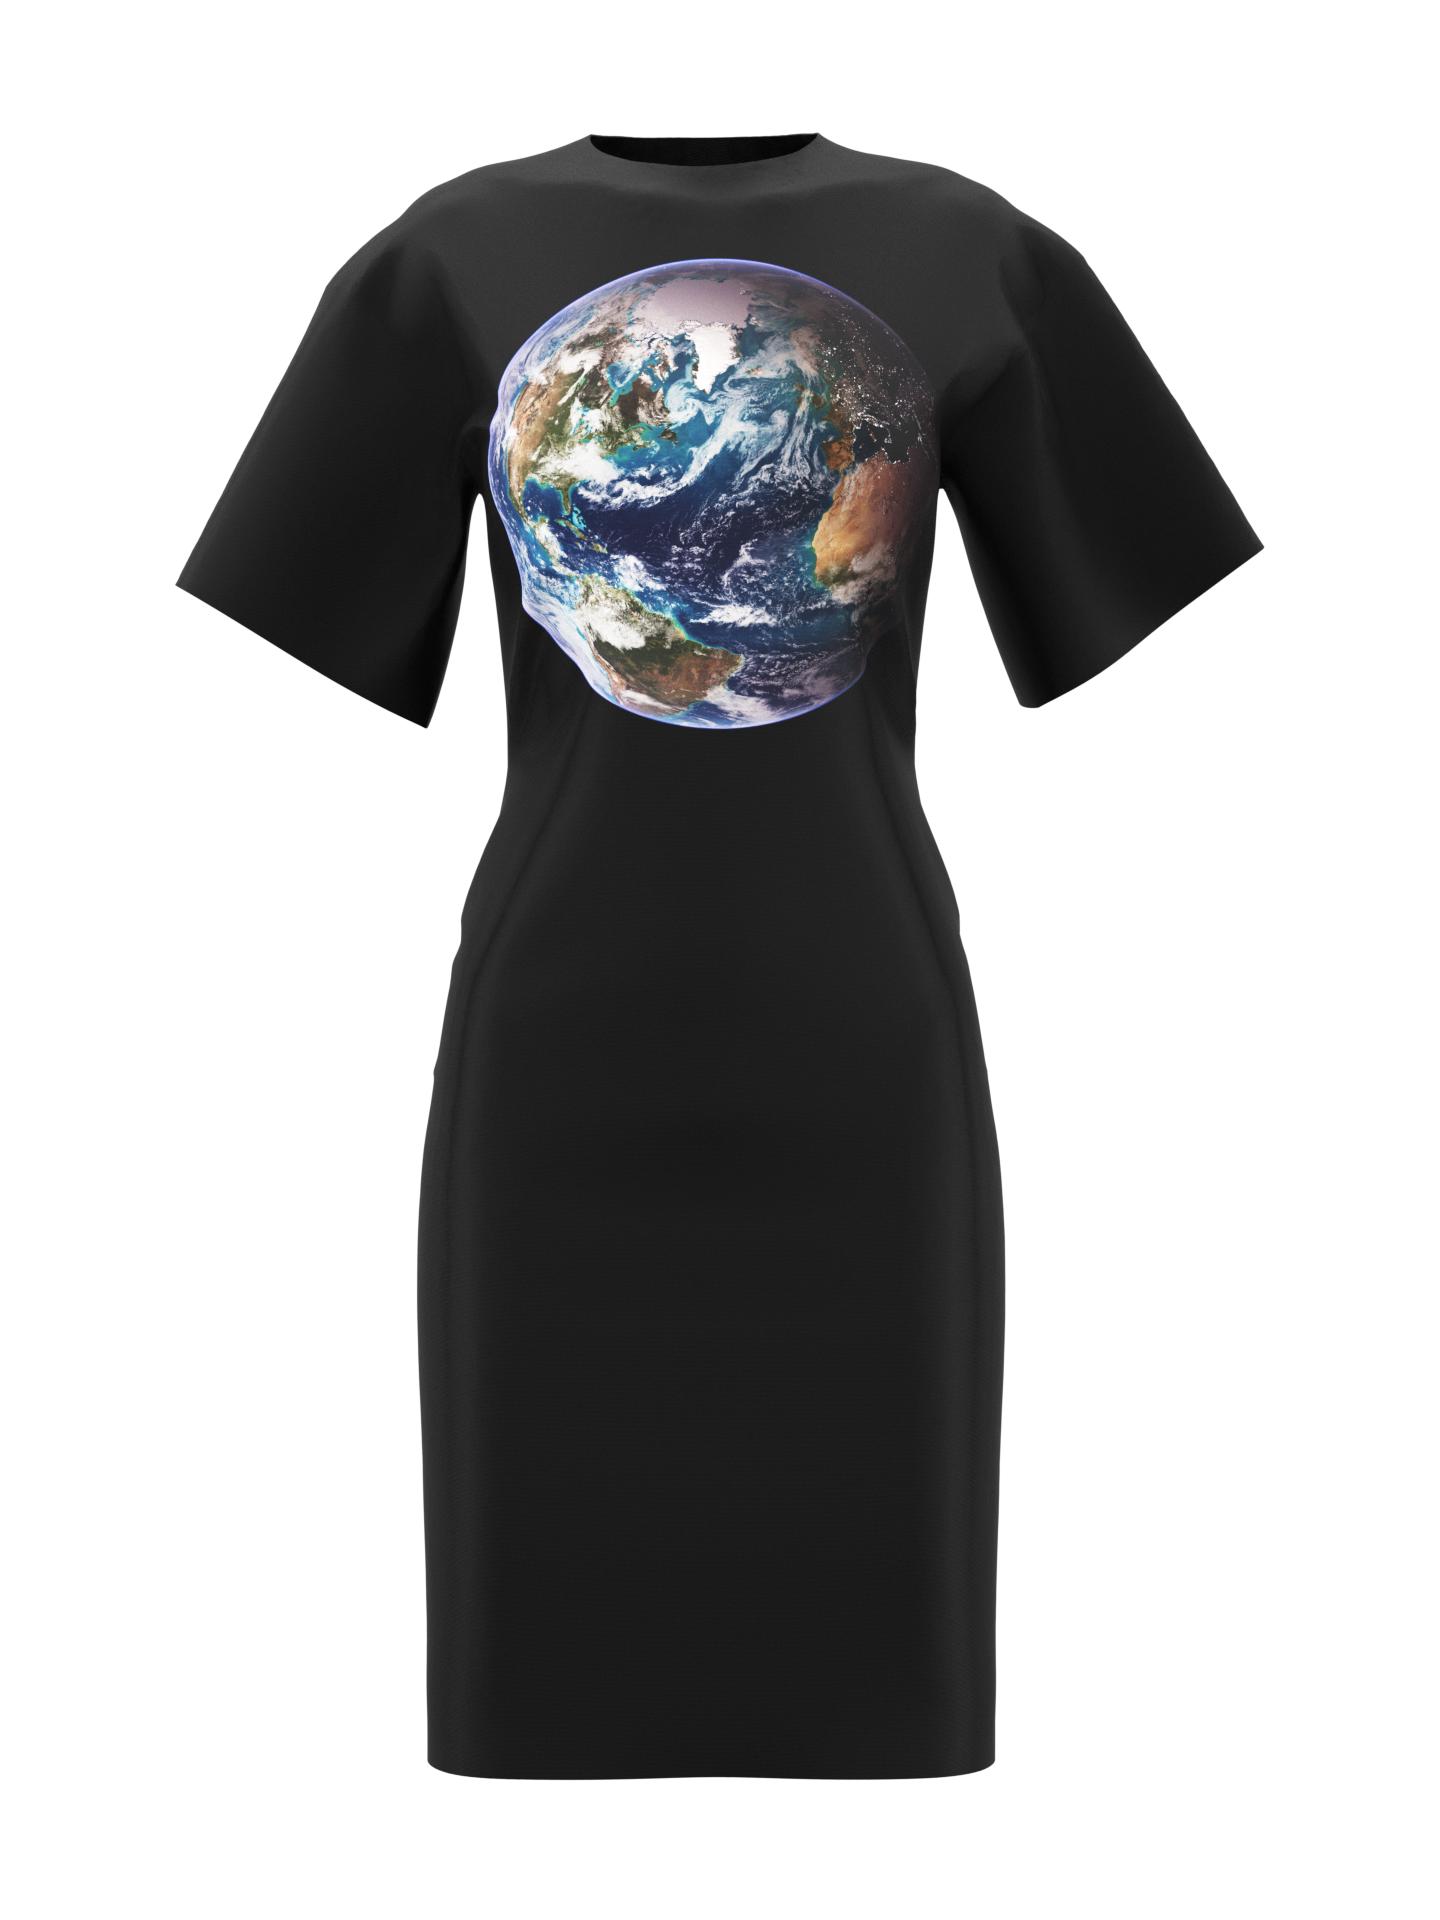 Dress -  Blue Marble 2007 by DRESSX UNIVERSE INSPIRED BY NASA